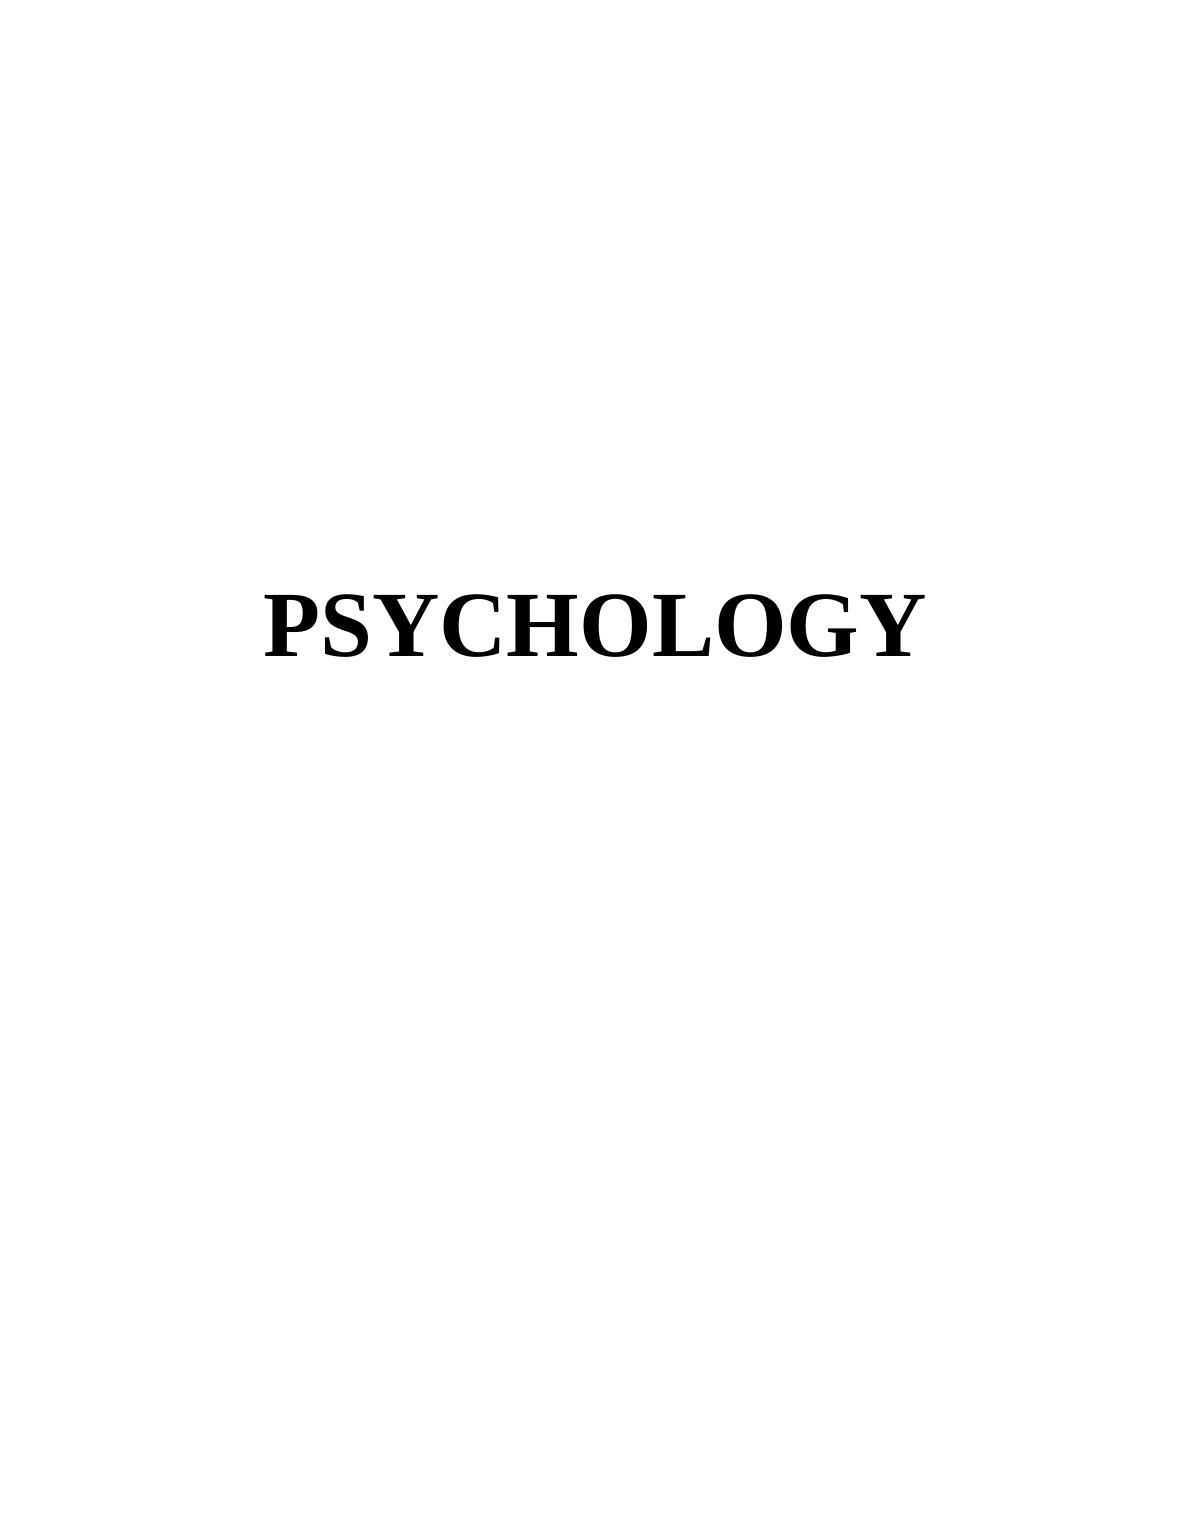 Psychology Assignment Solution (Doc)_1